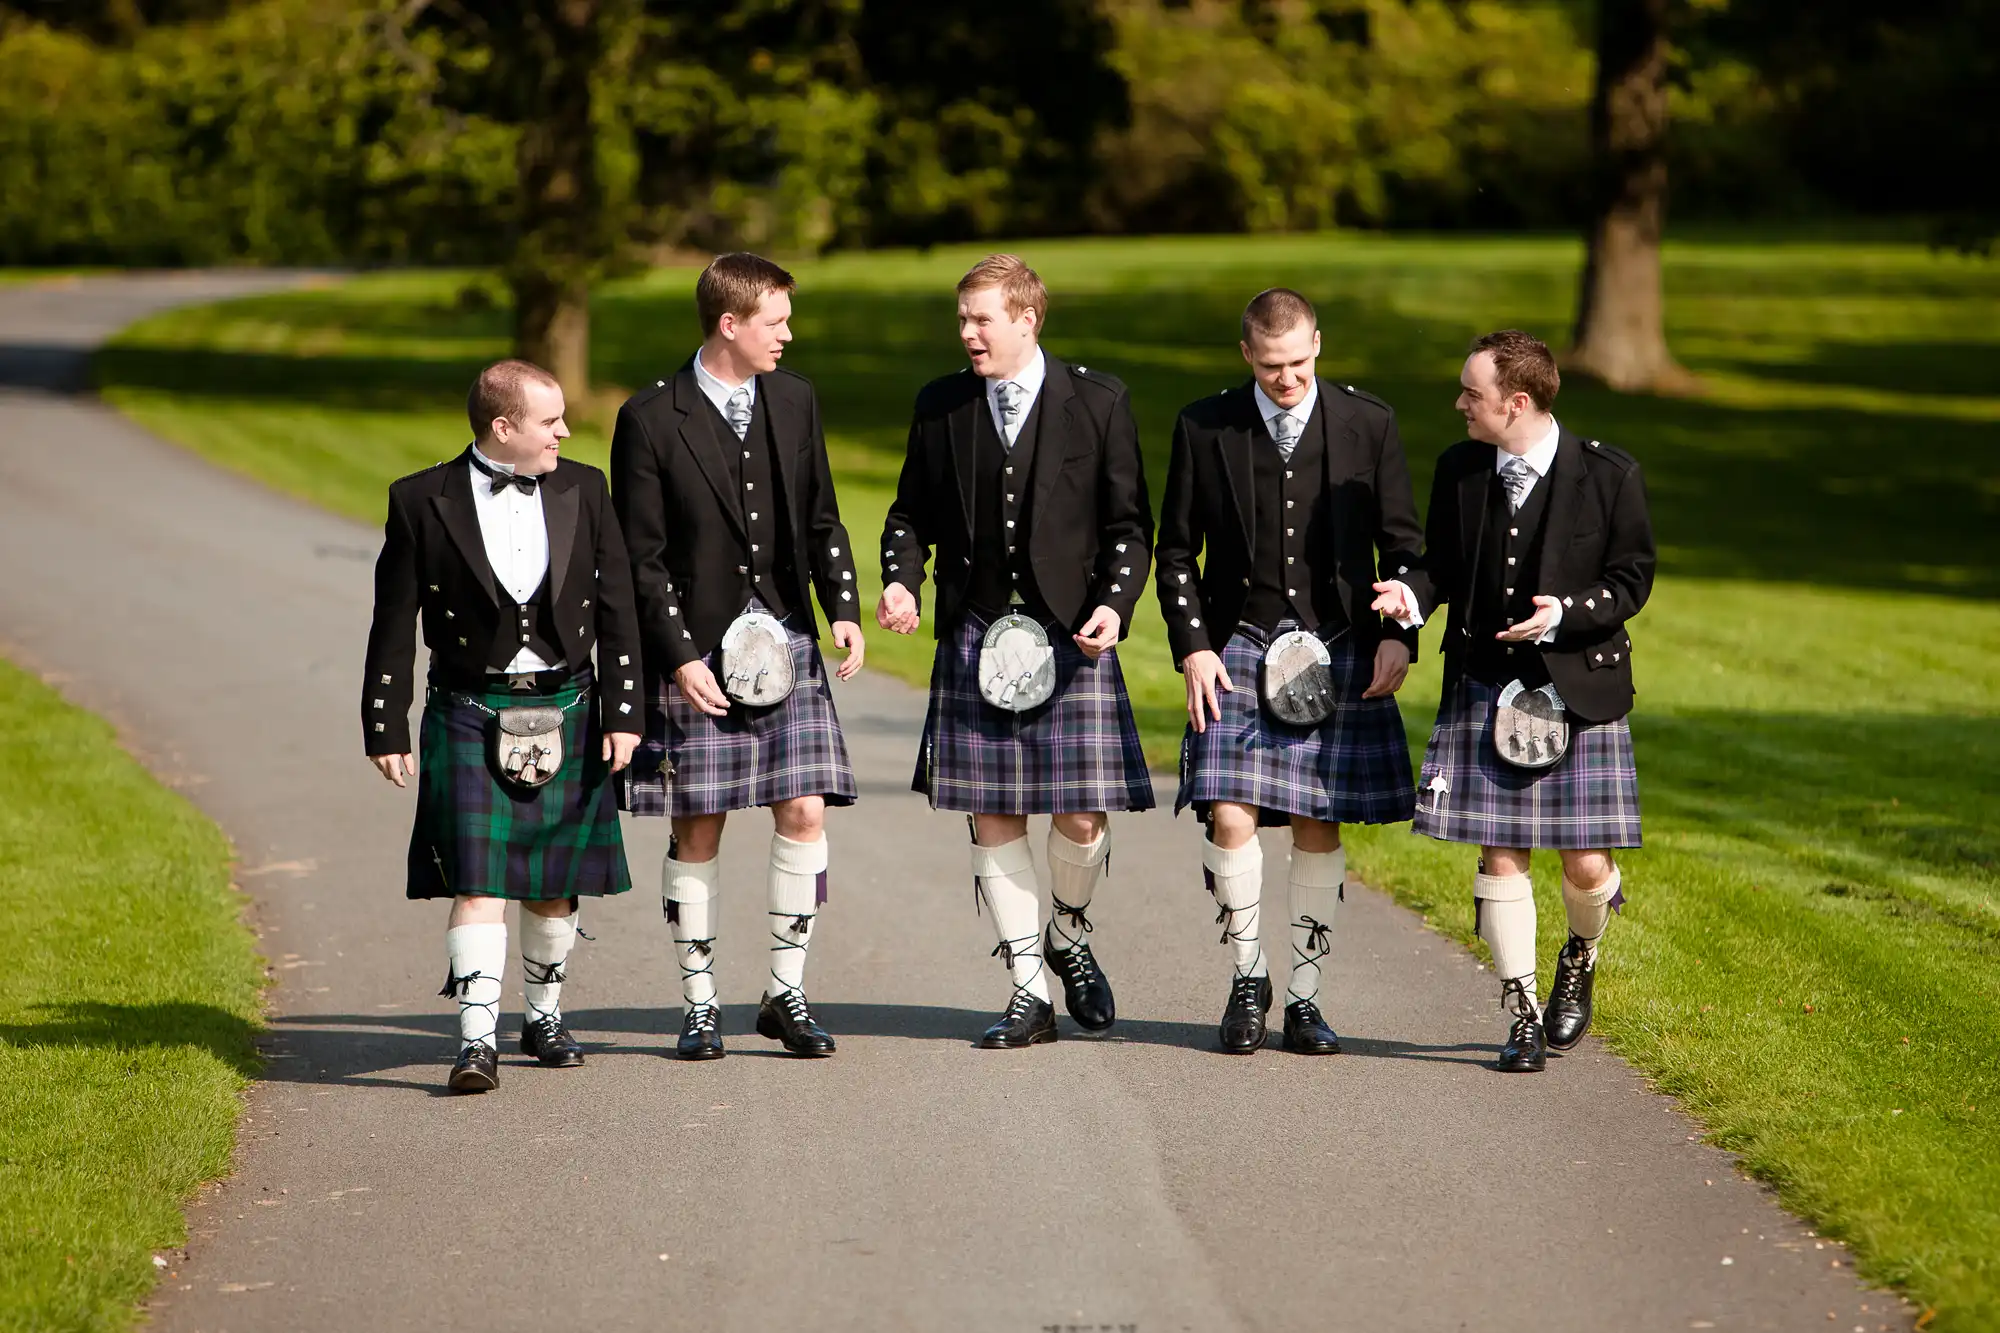 Five men in traditional scottish kilts and jackets walking along a park path, chatting and smiling on a sunny day.